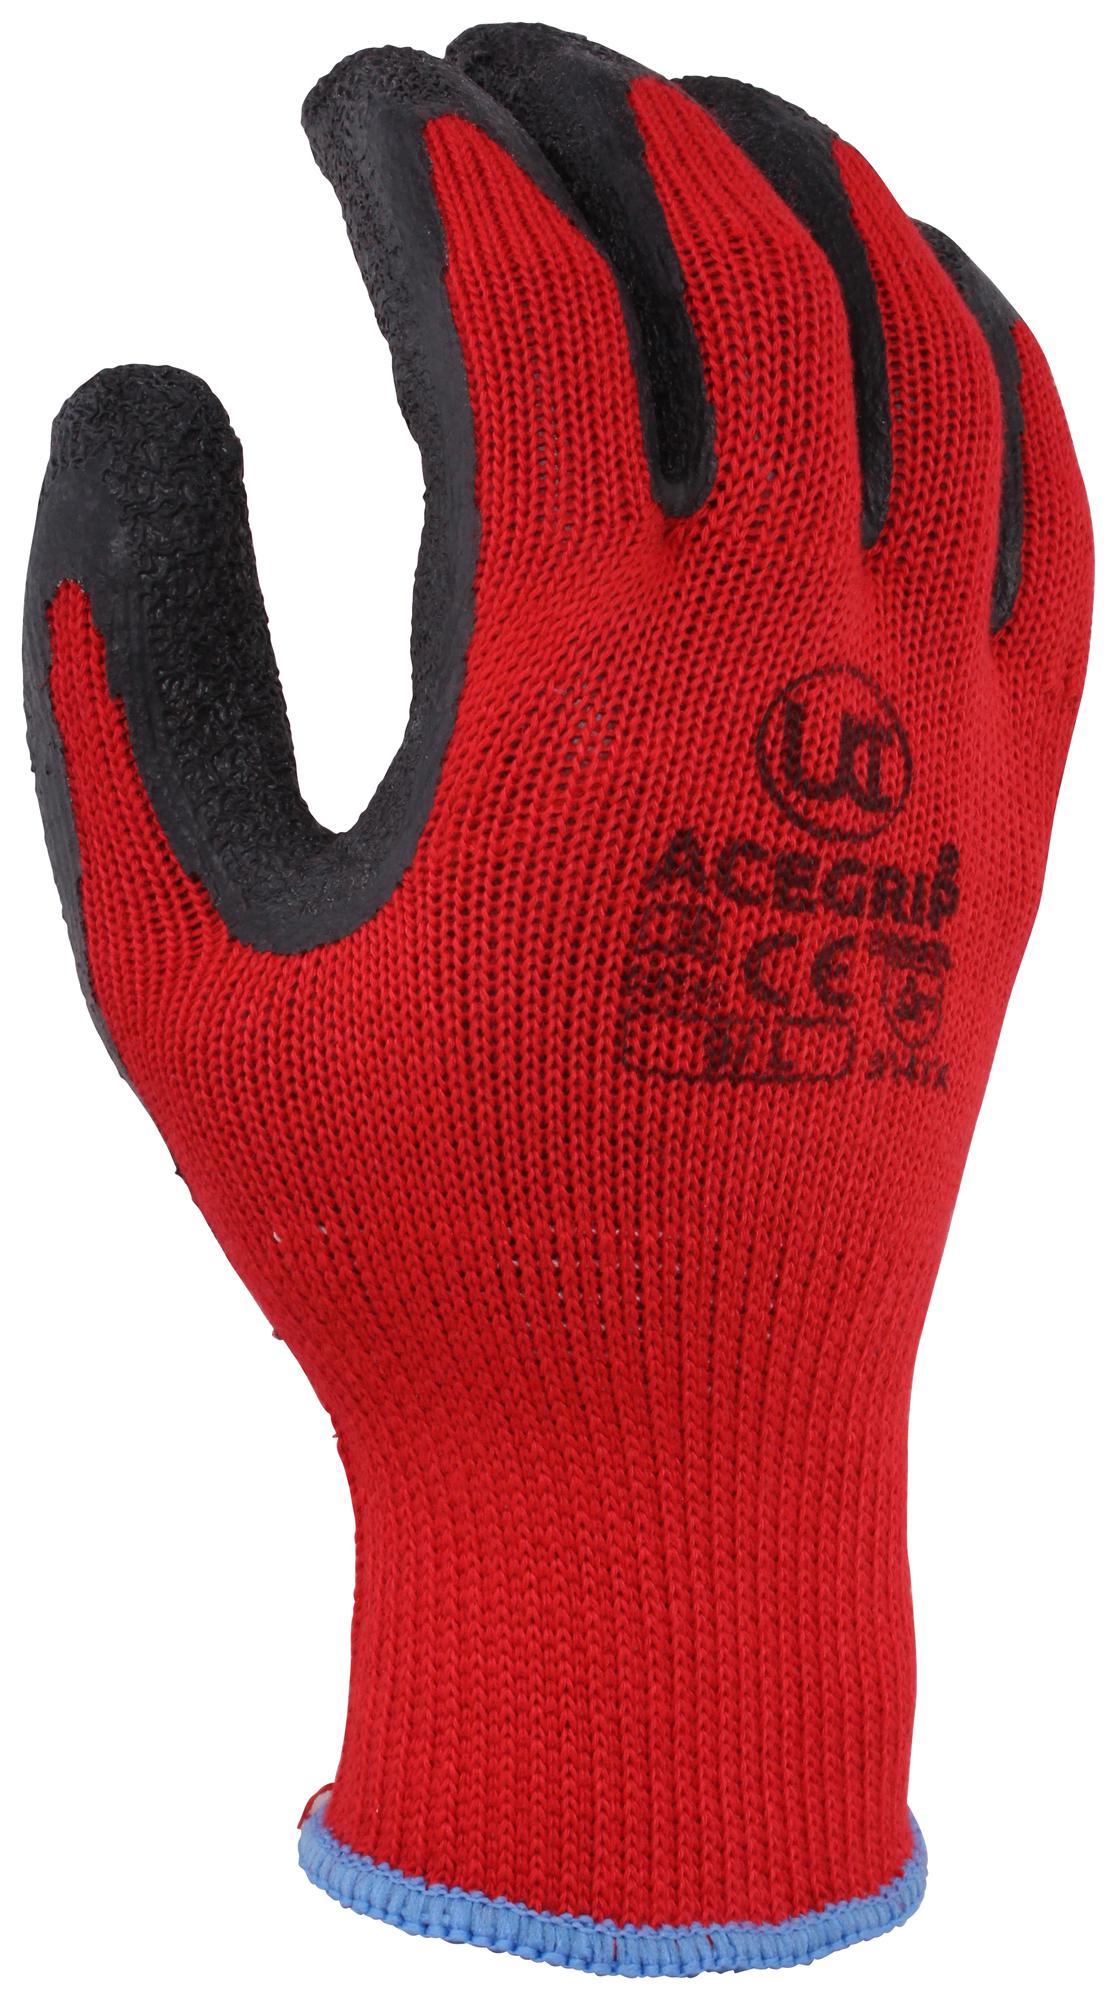 Uci G/acegrip-Rp/red/11 Gloves, Polycotton Liner, Red, Xxl